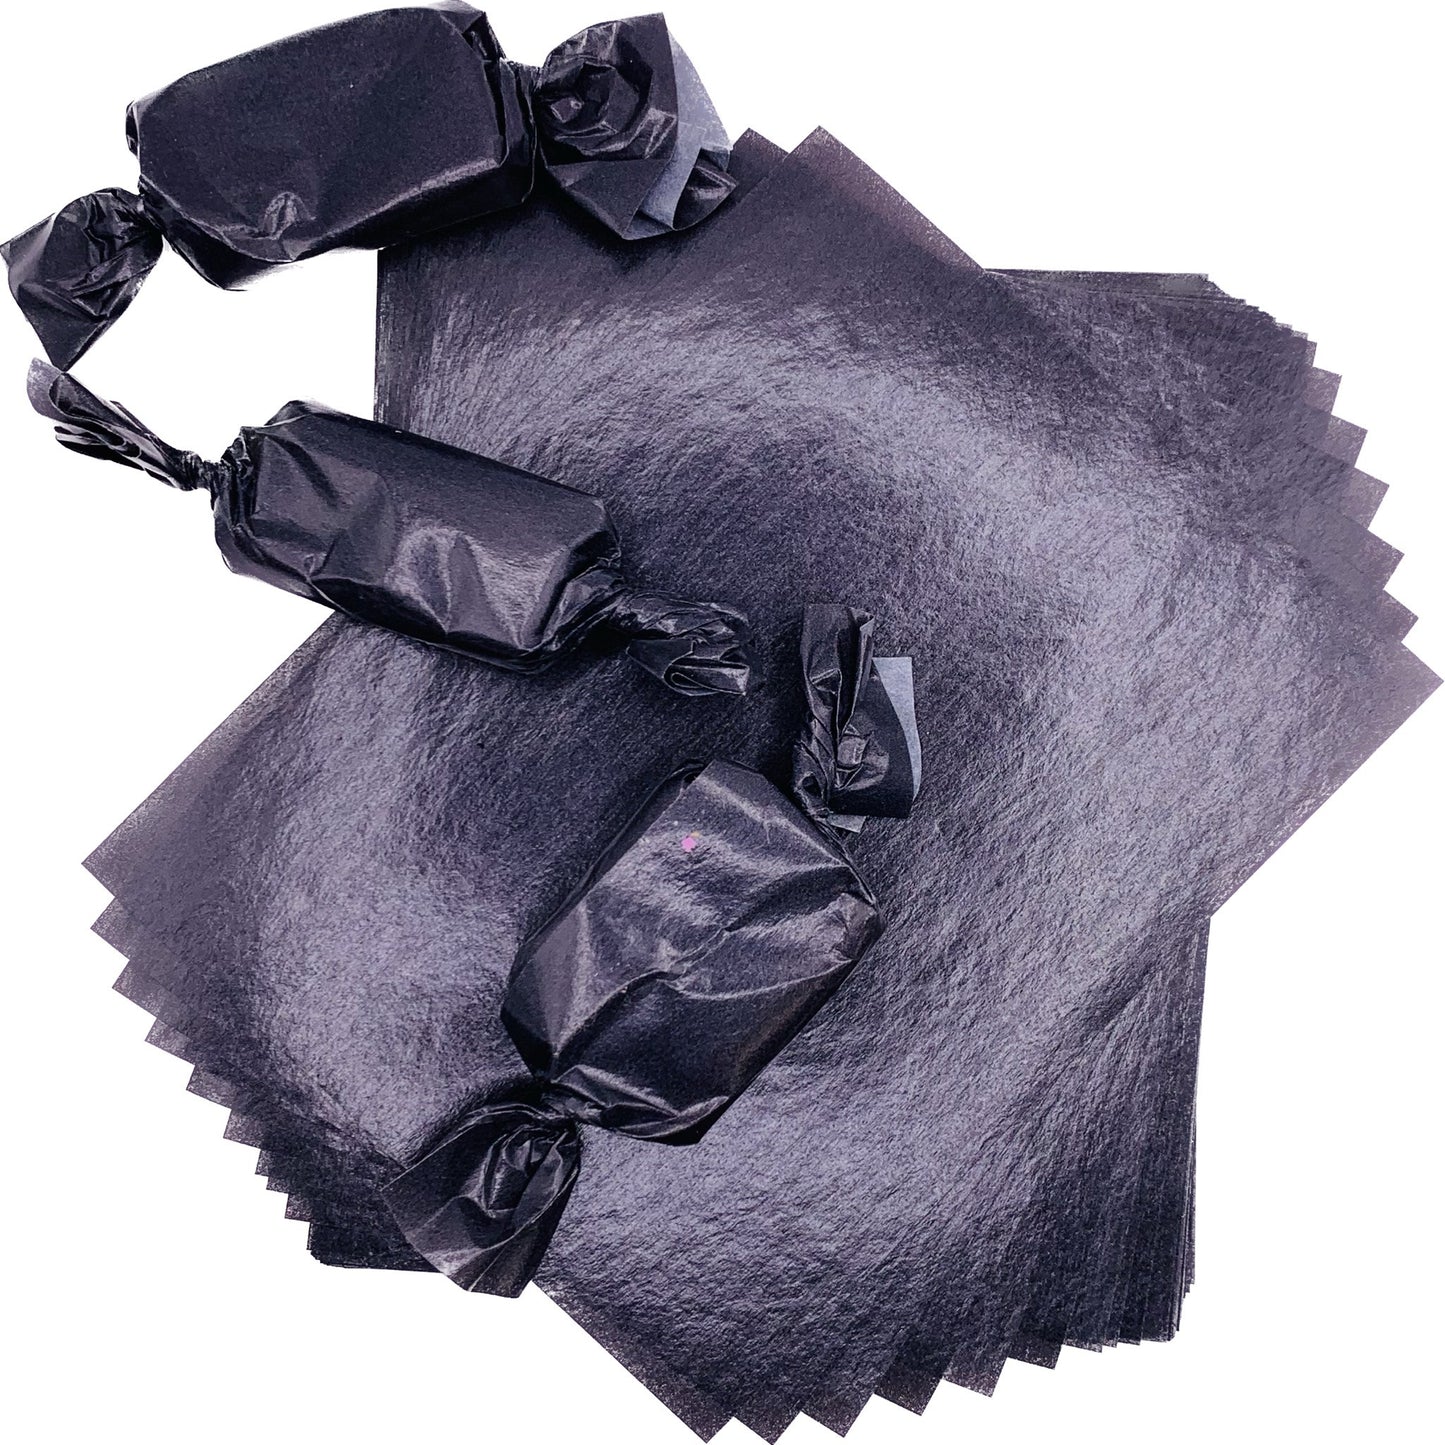 Black Caramel Candy Wrappers with Three pieces of wrapped Candy